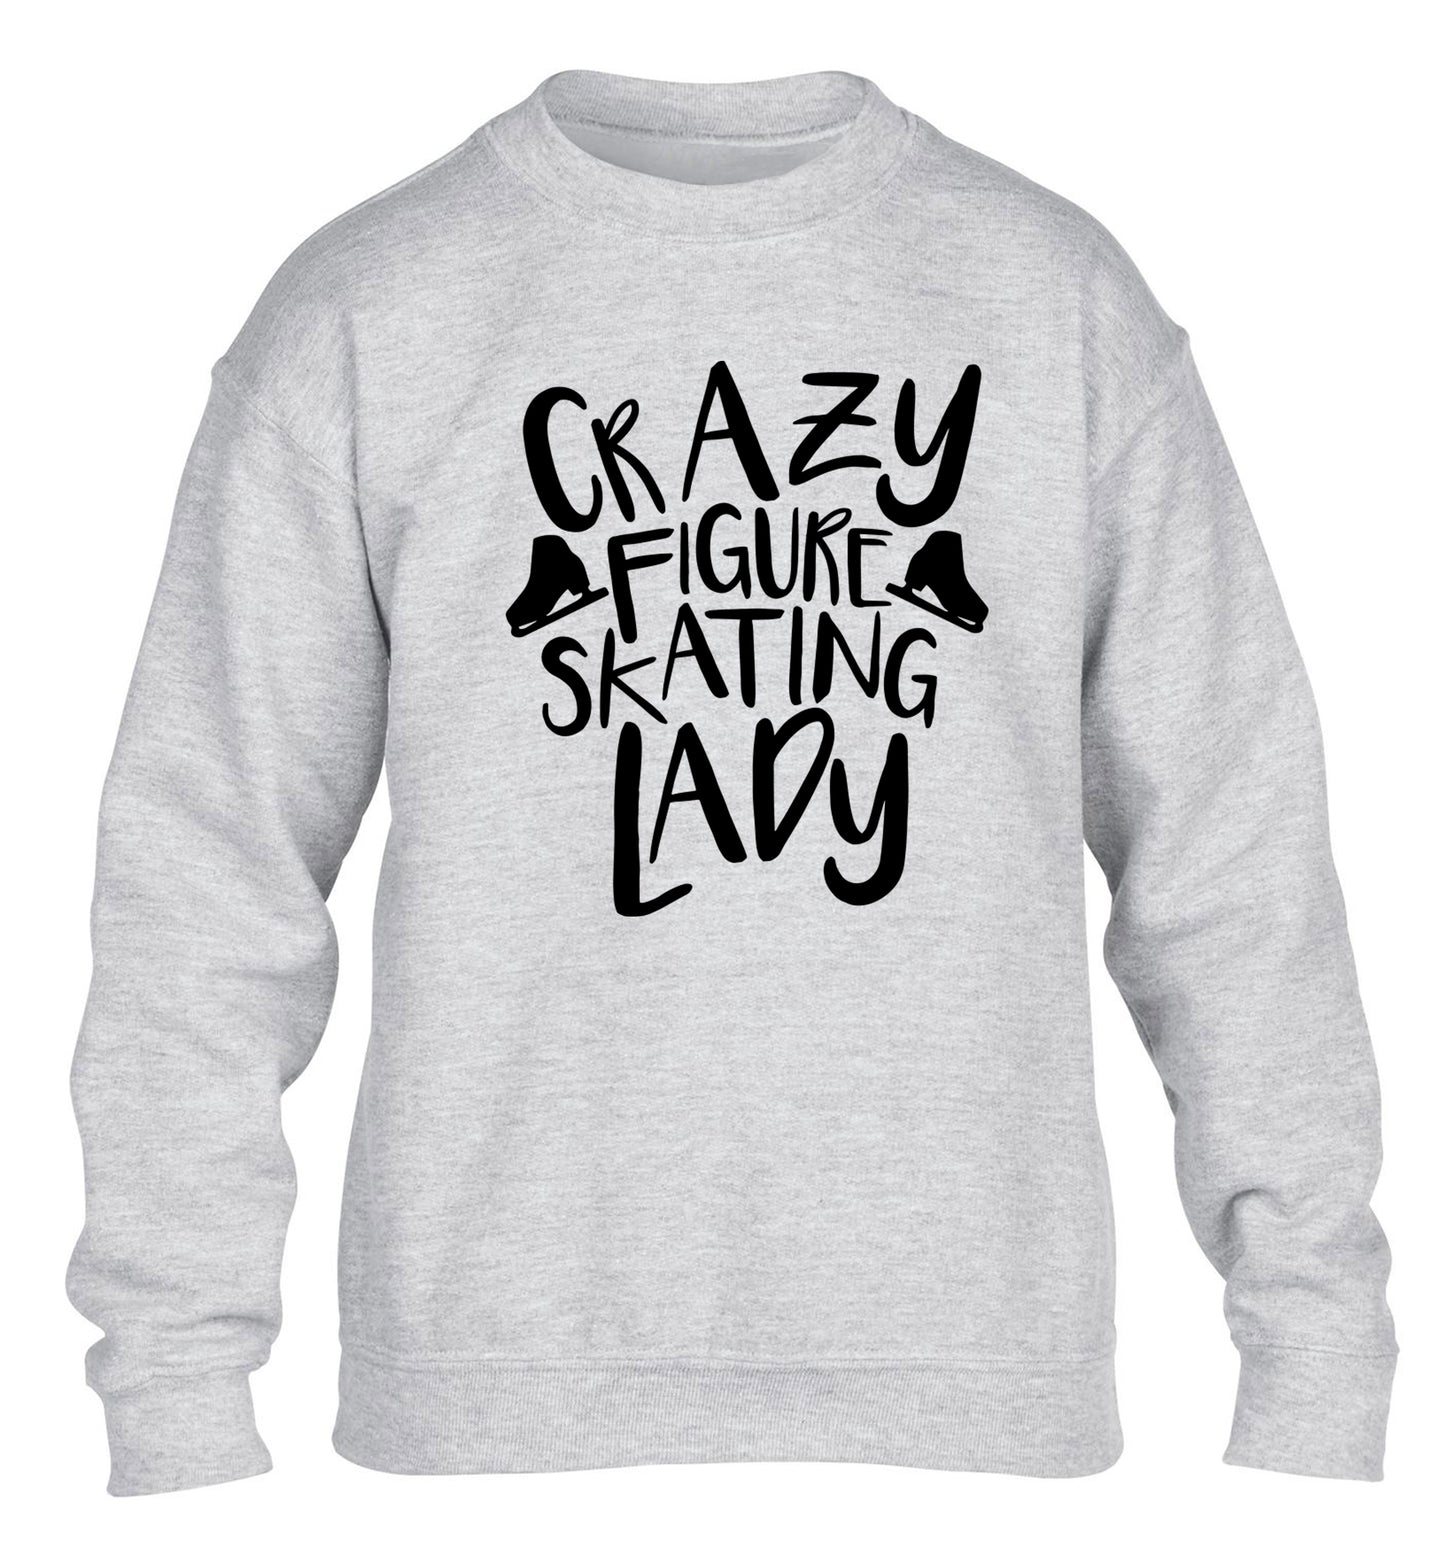 Crazy figure skating lady children's grey sweater 12-14 Years